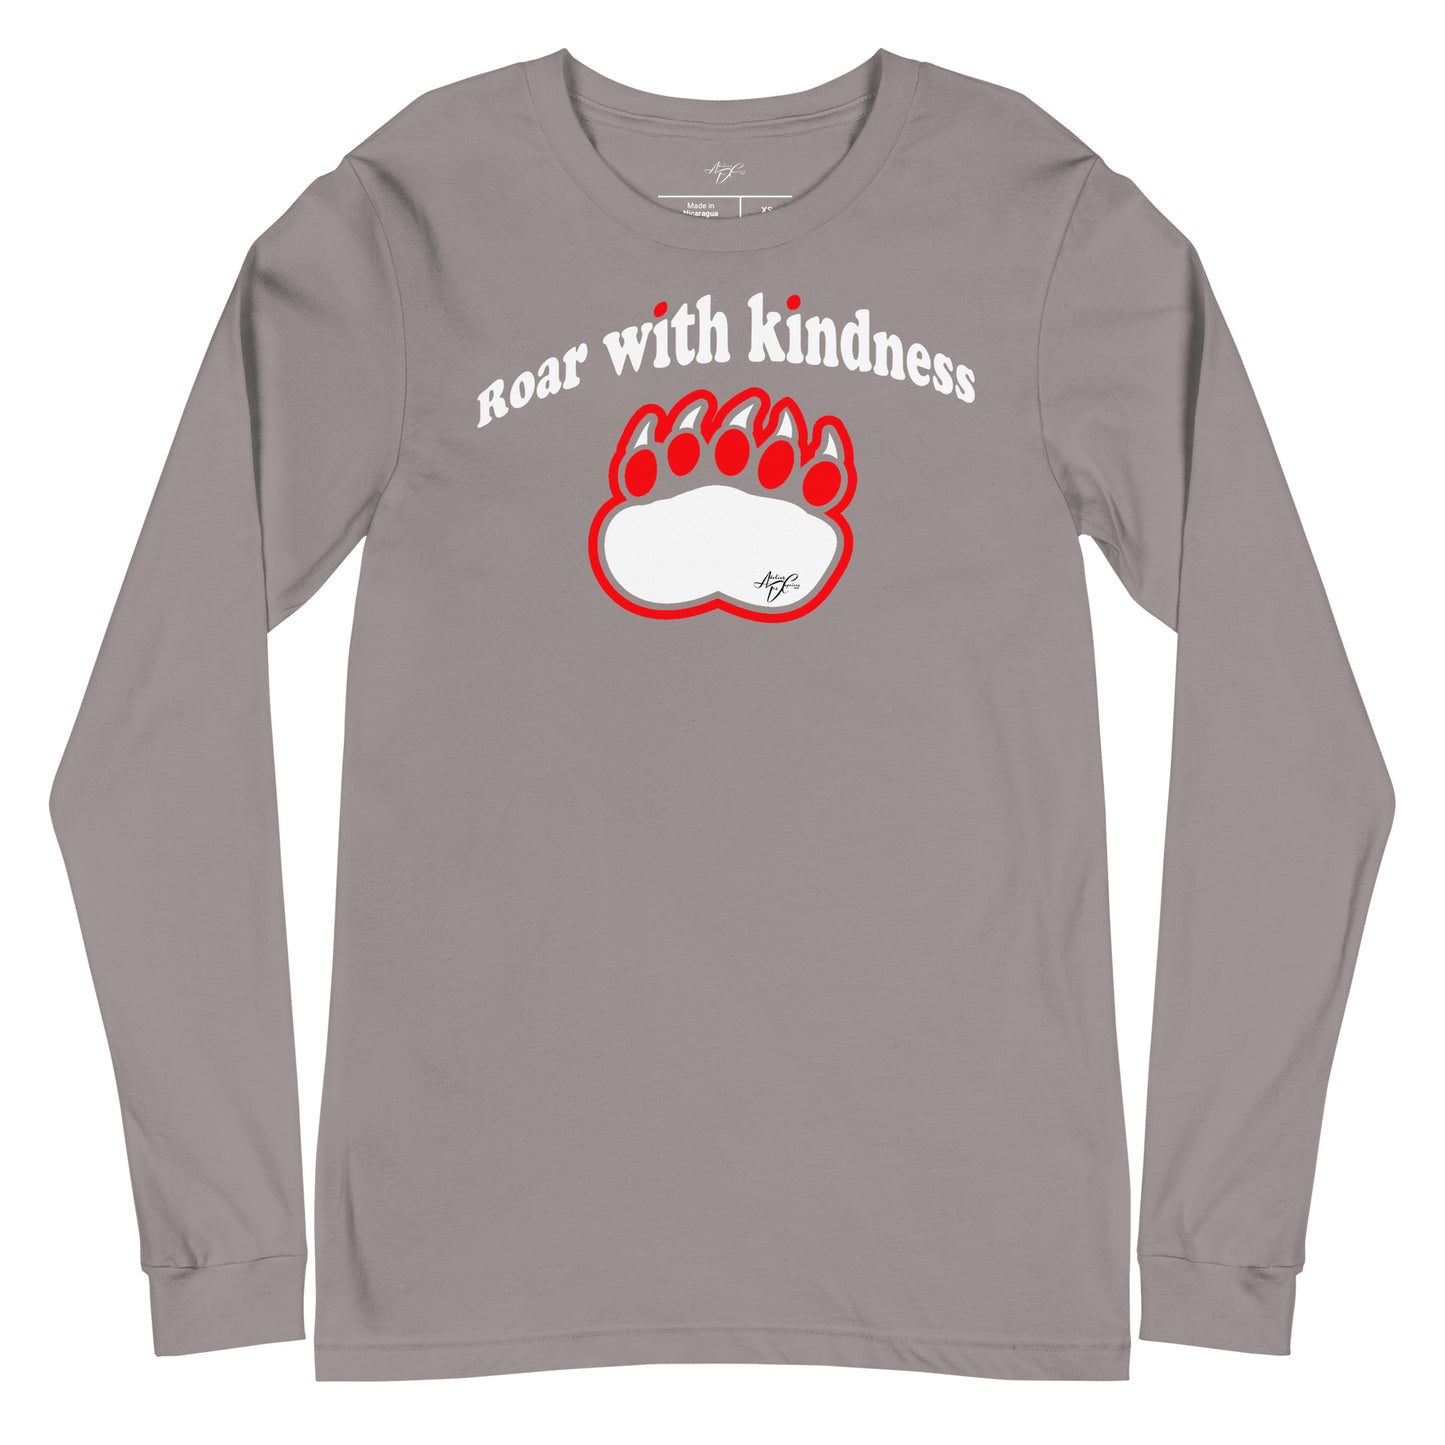 Roar with Kindness Bear Paw Unisex Long Sleeve Tee - Atelier Des Caprices